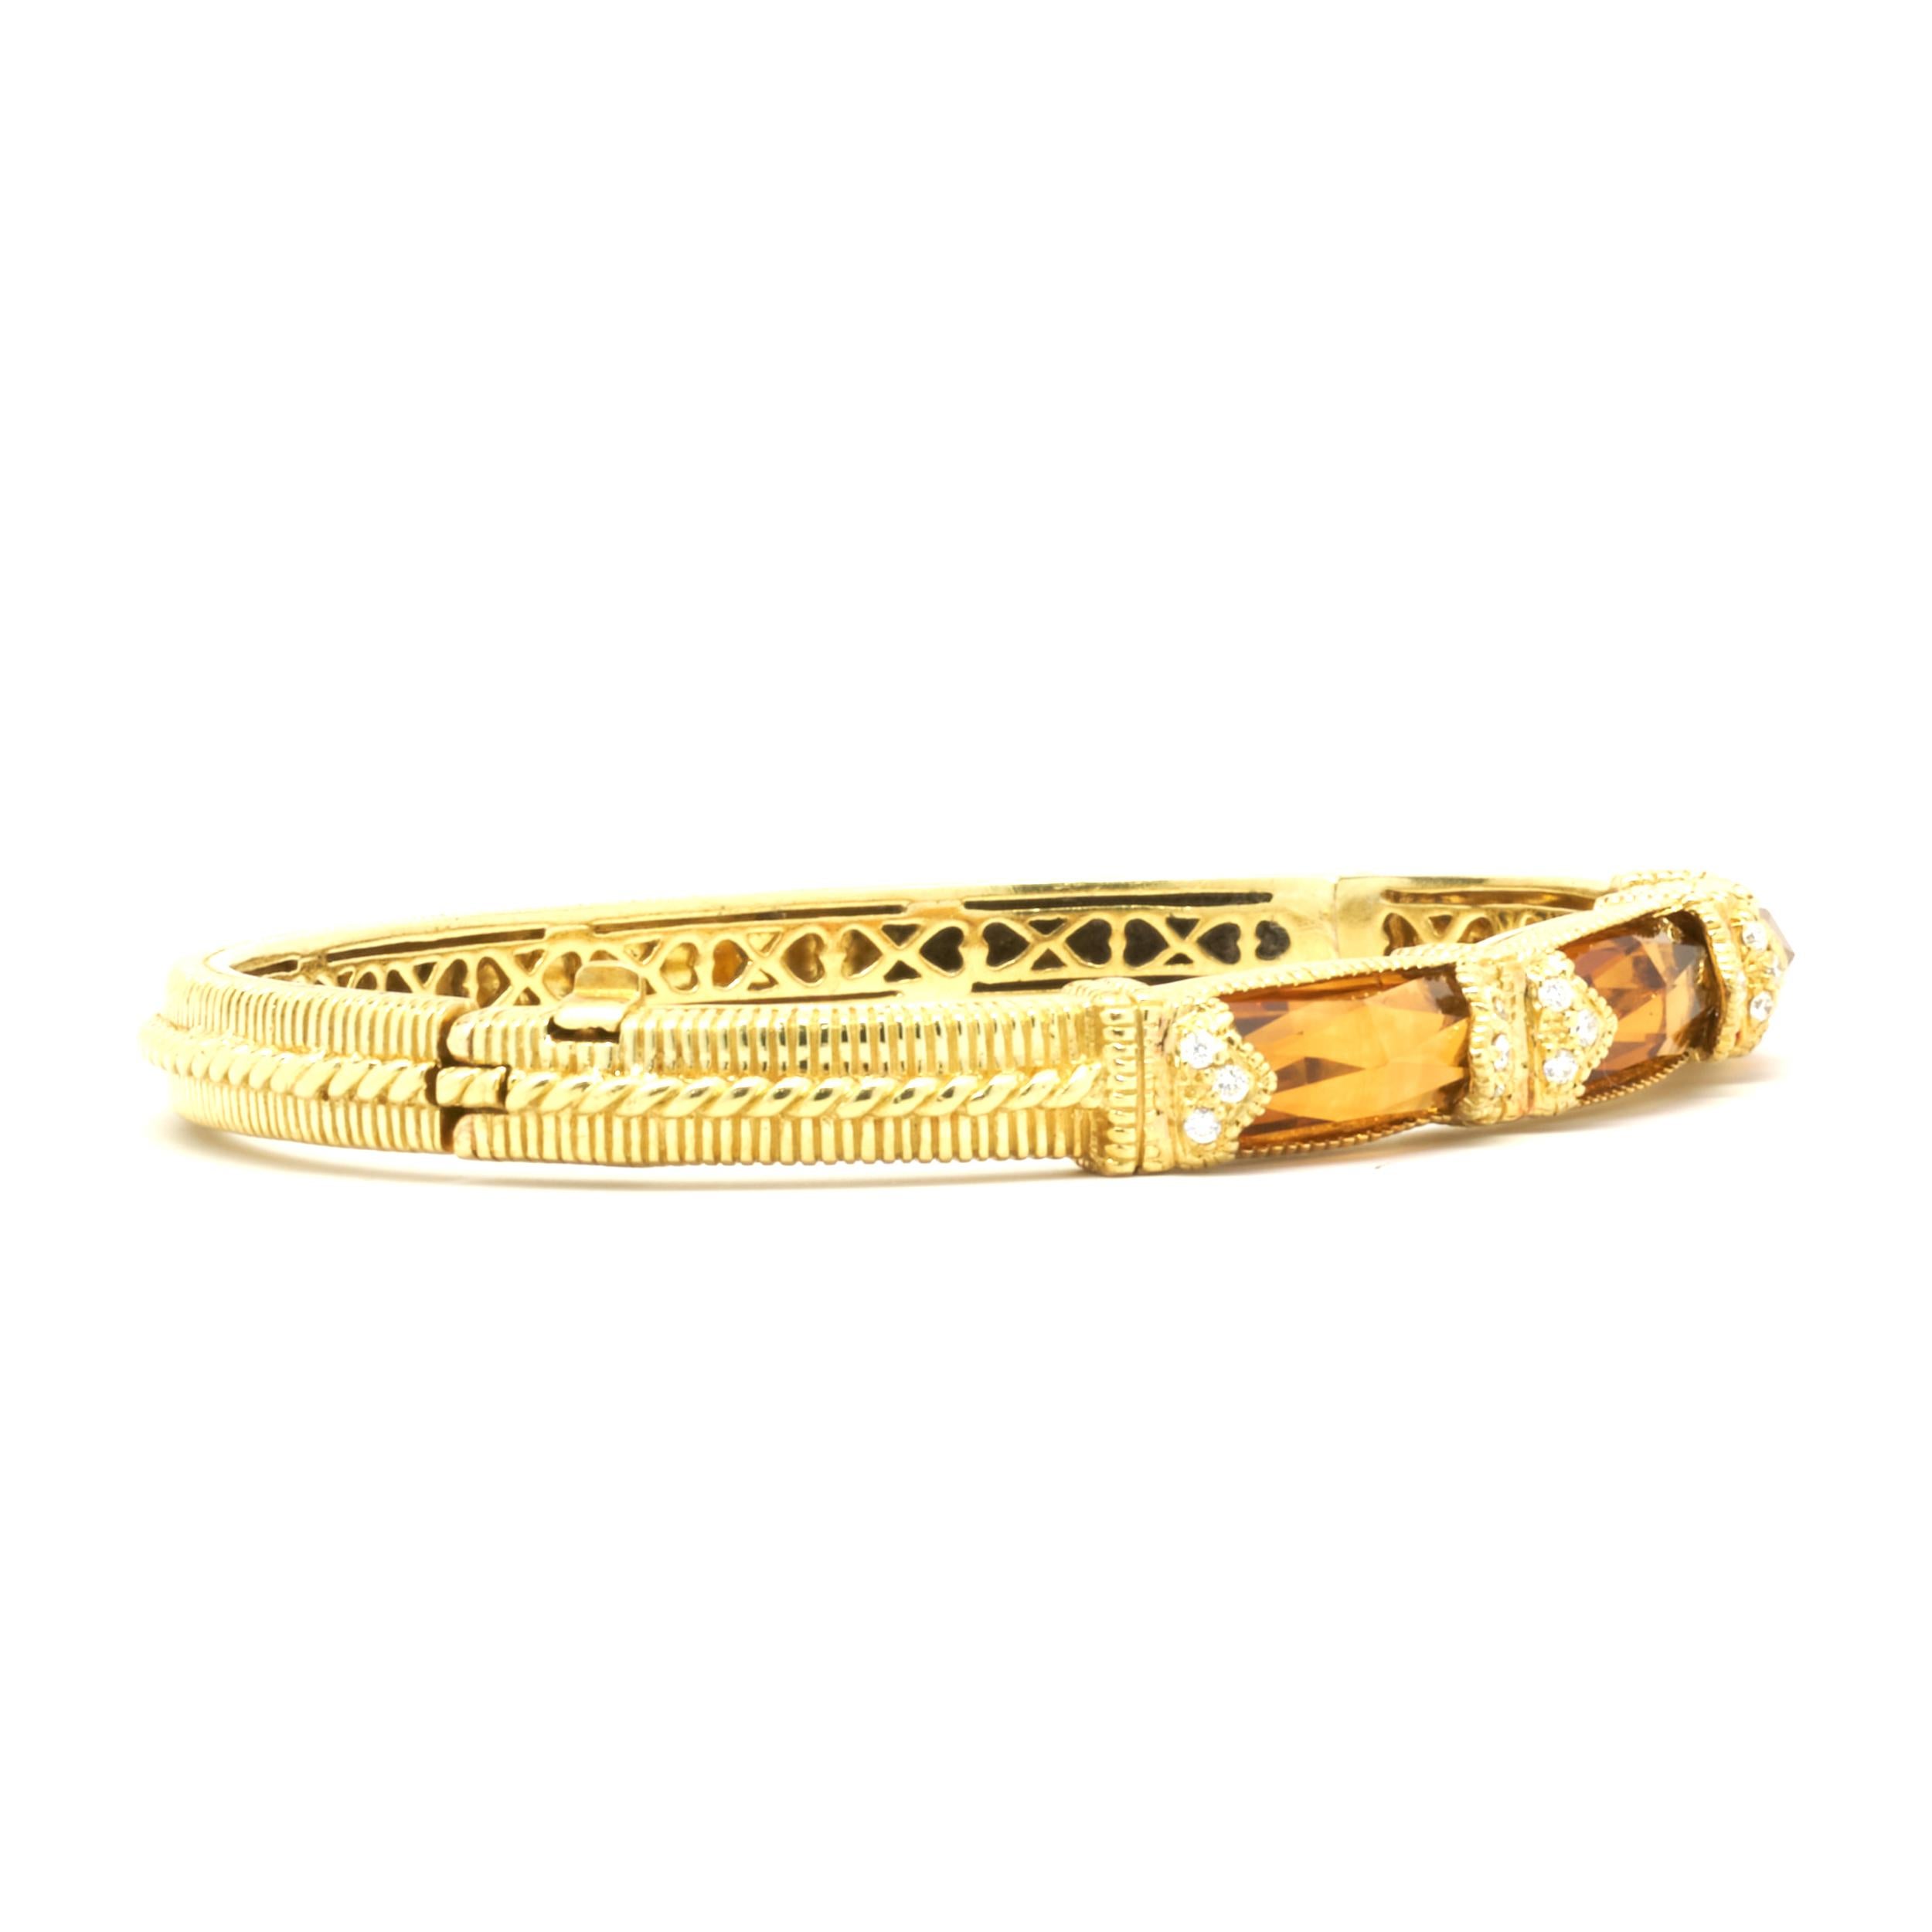 Designer: Judith Ripka
Material: 18K yellow gold
Diamond: 18 round brilliant cut = .18cttw
Color: G
Clarity: VS1
Weight: 31.97 grams
Dimensions: bracelet will fit up to a 7-inch bracelet